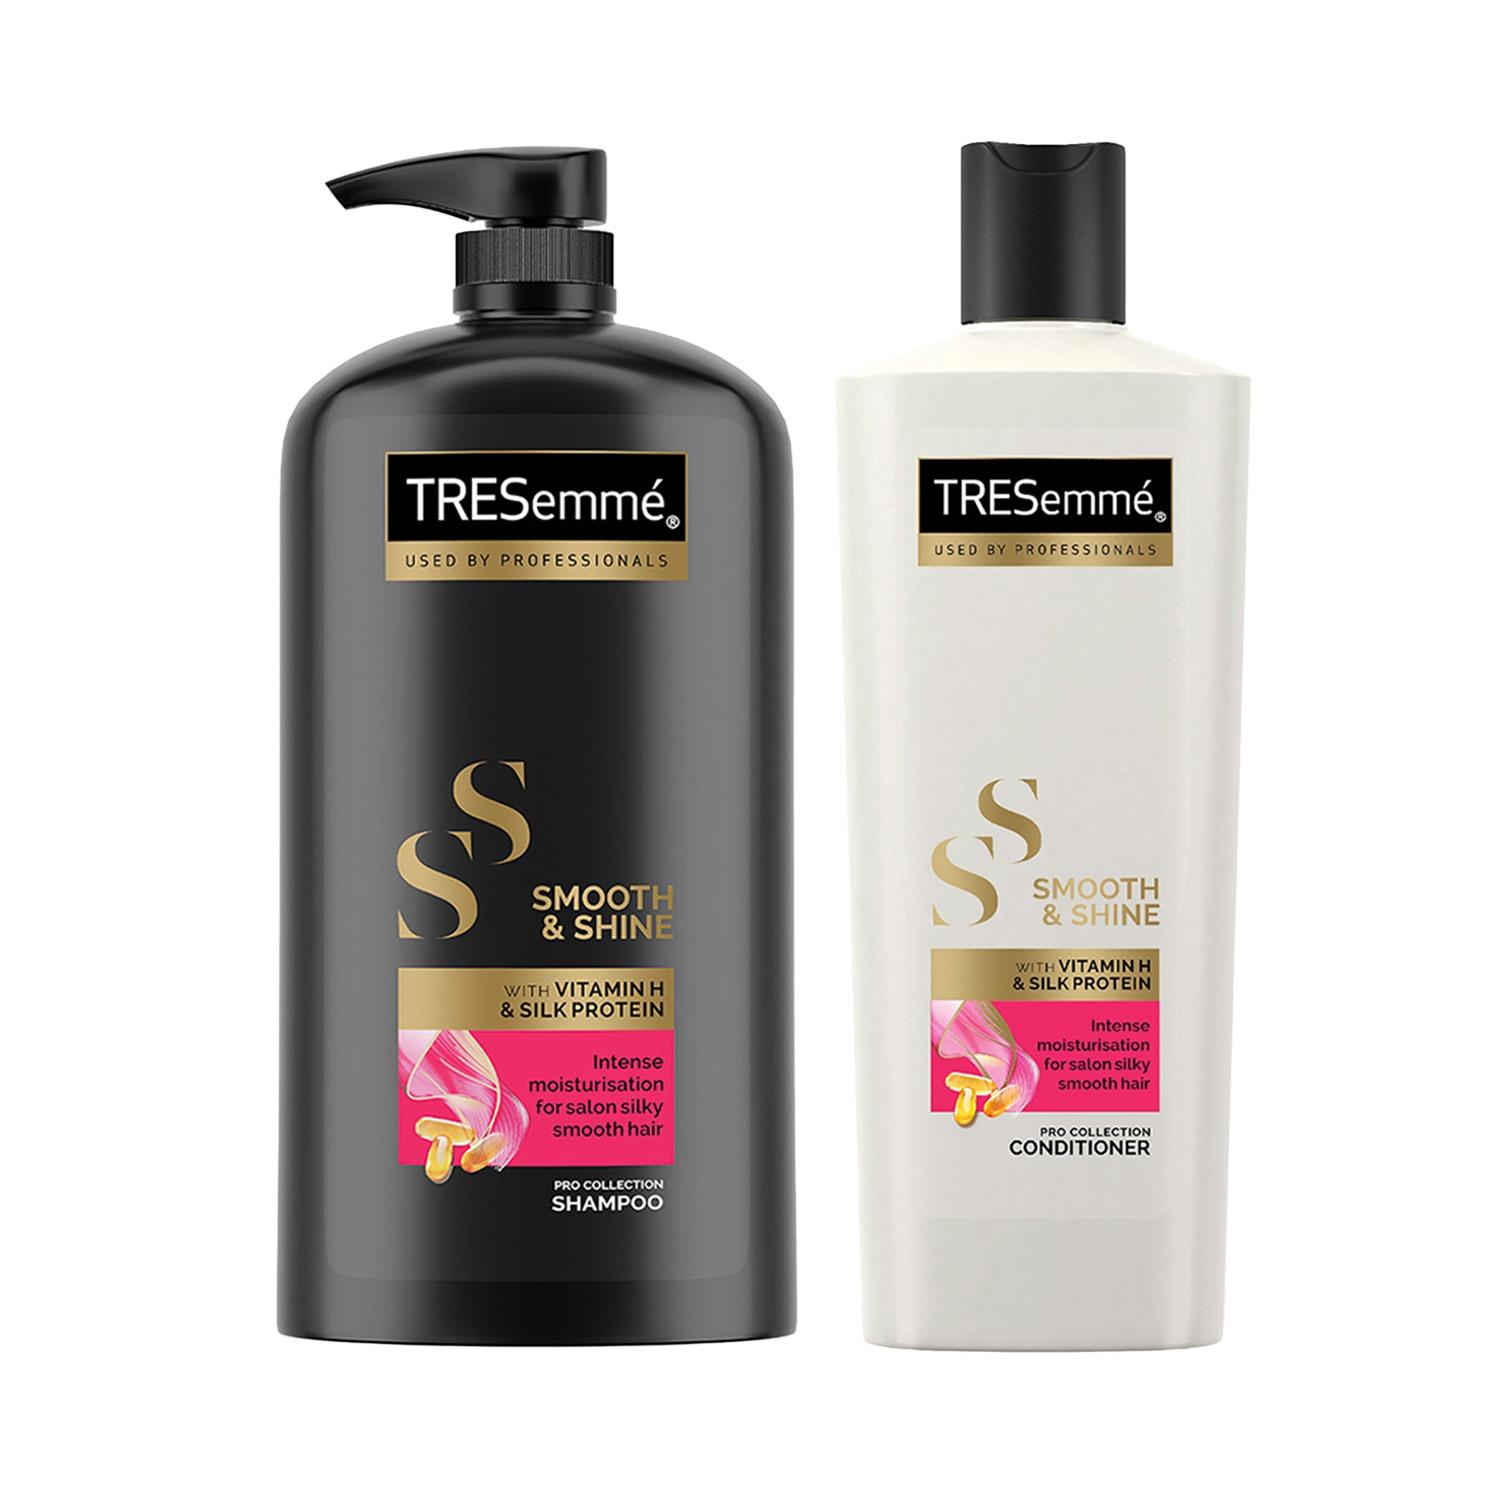 Tresemme | Tresemme Smooth & Shine Kit For Silky Smooth Hair - Shampoo + Conditioner